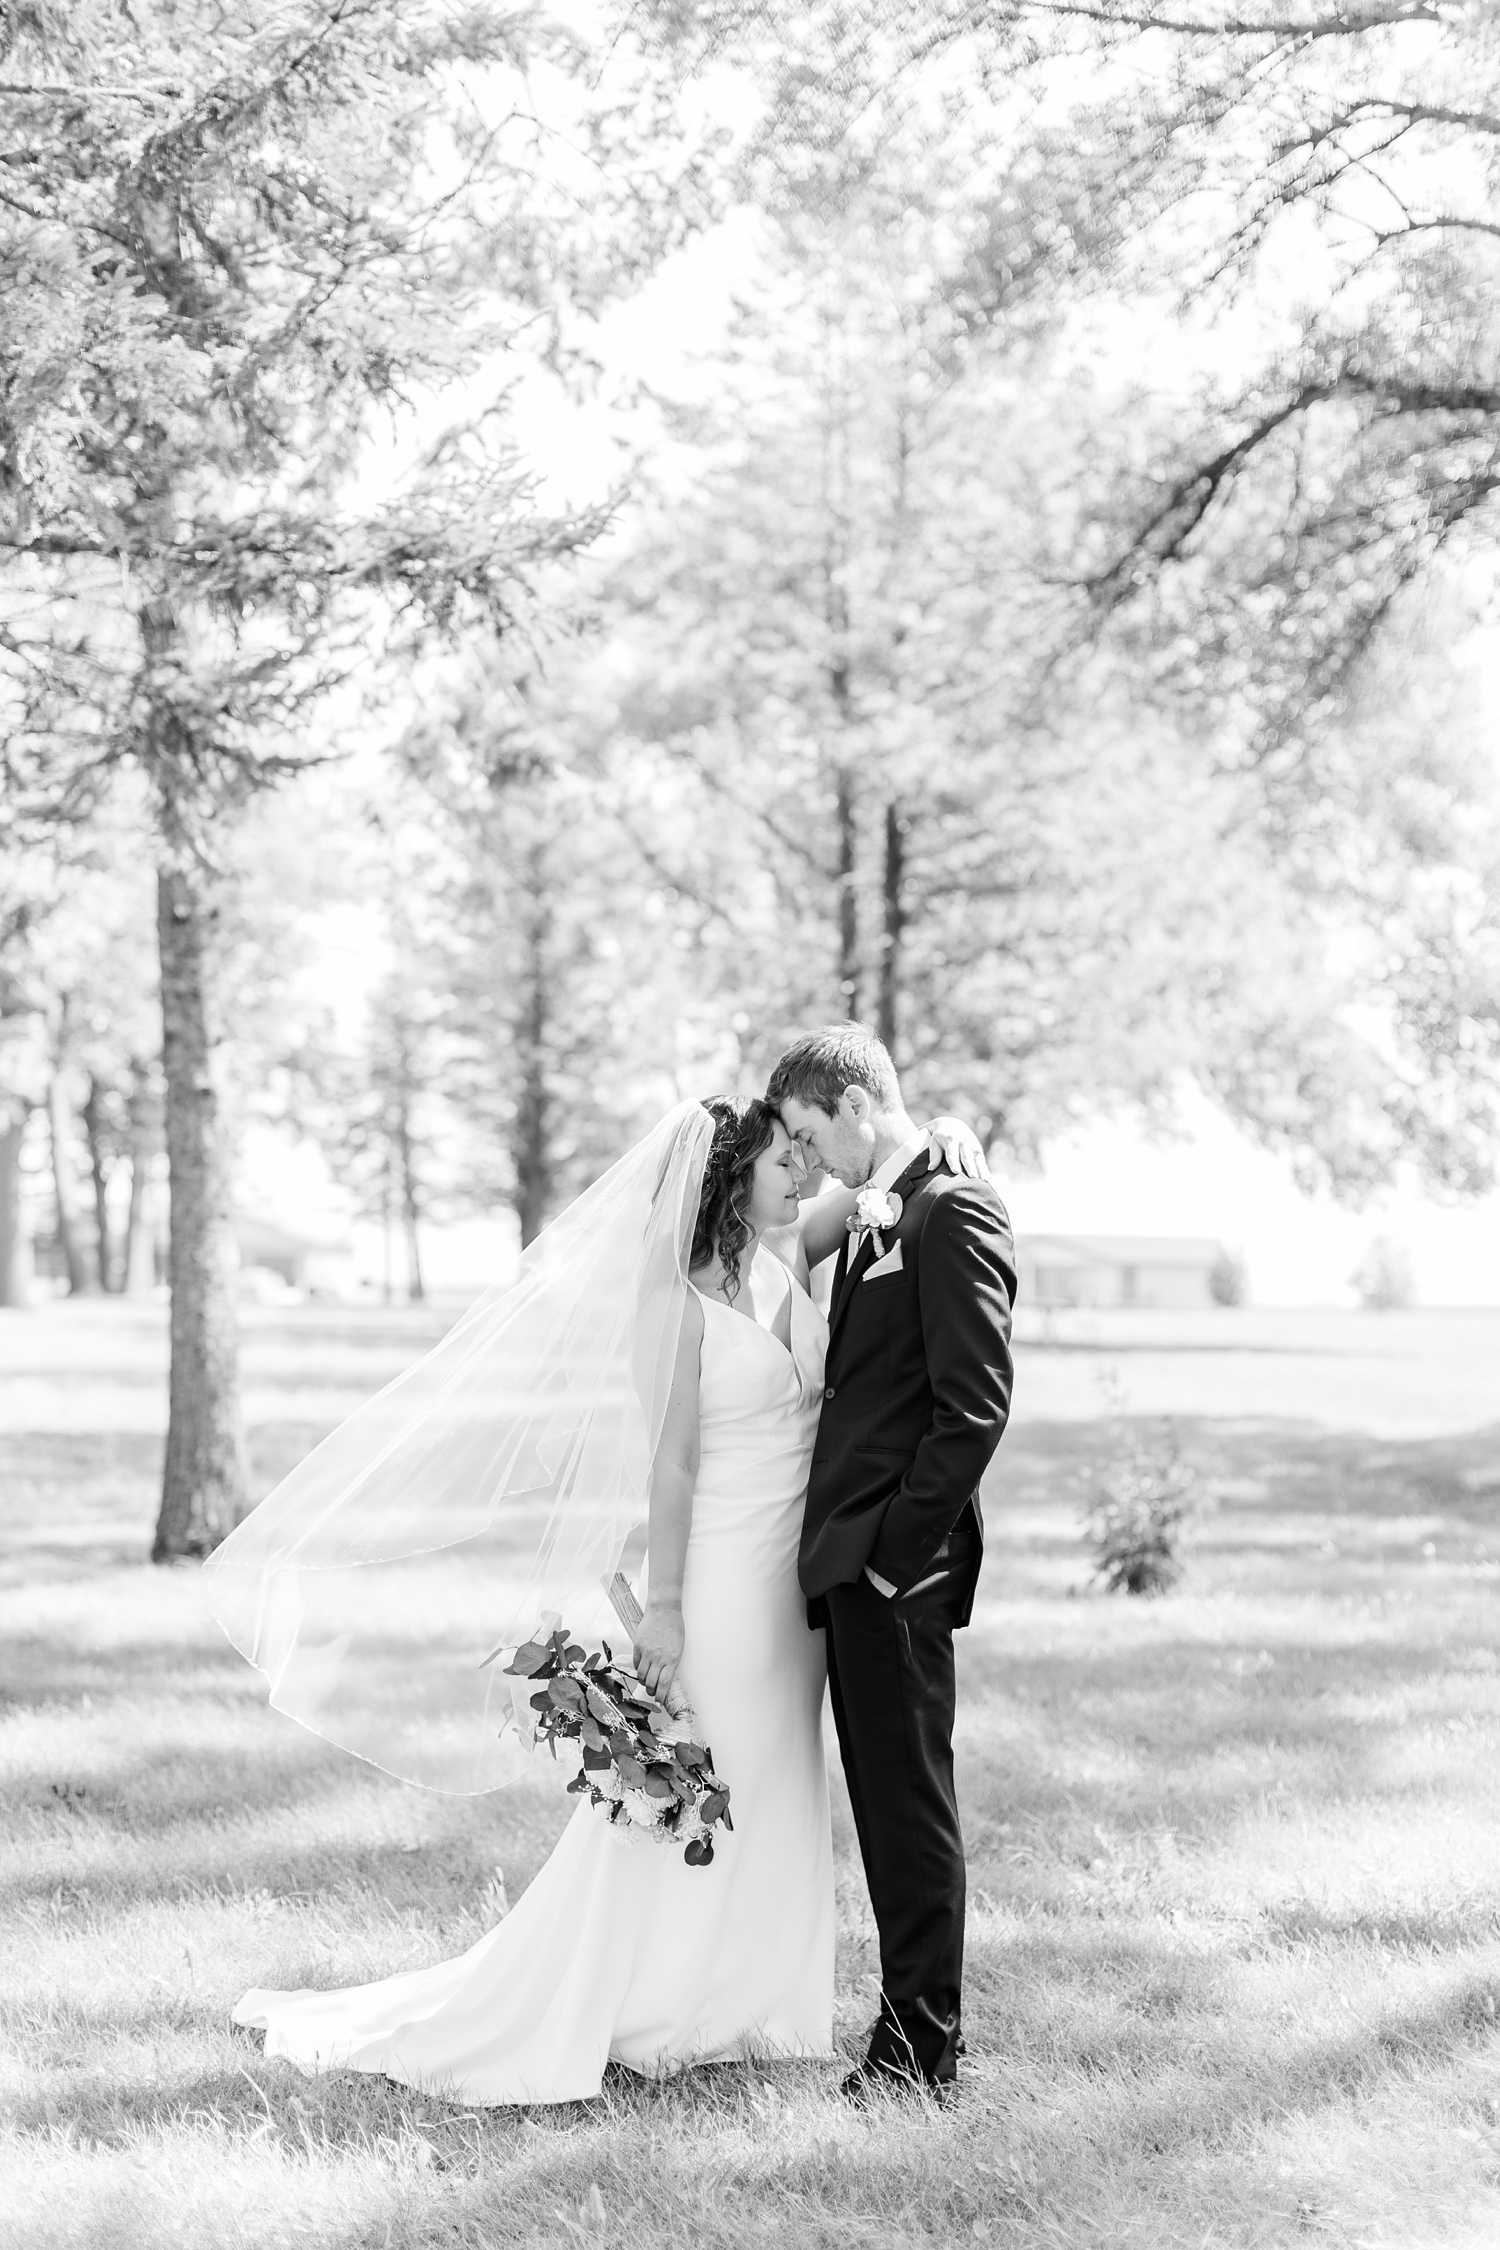 Grant and Alyssa rest their foreheads together as her veil flows in the wind at 5 Island Campground in Emmetsburg, IA | CB Studio